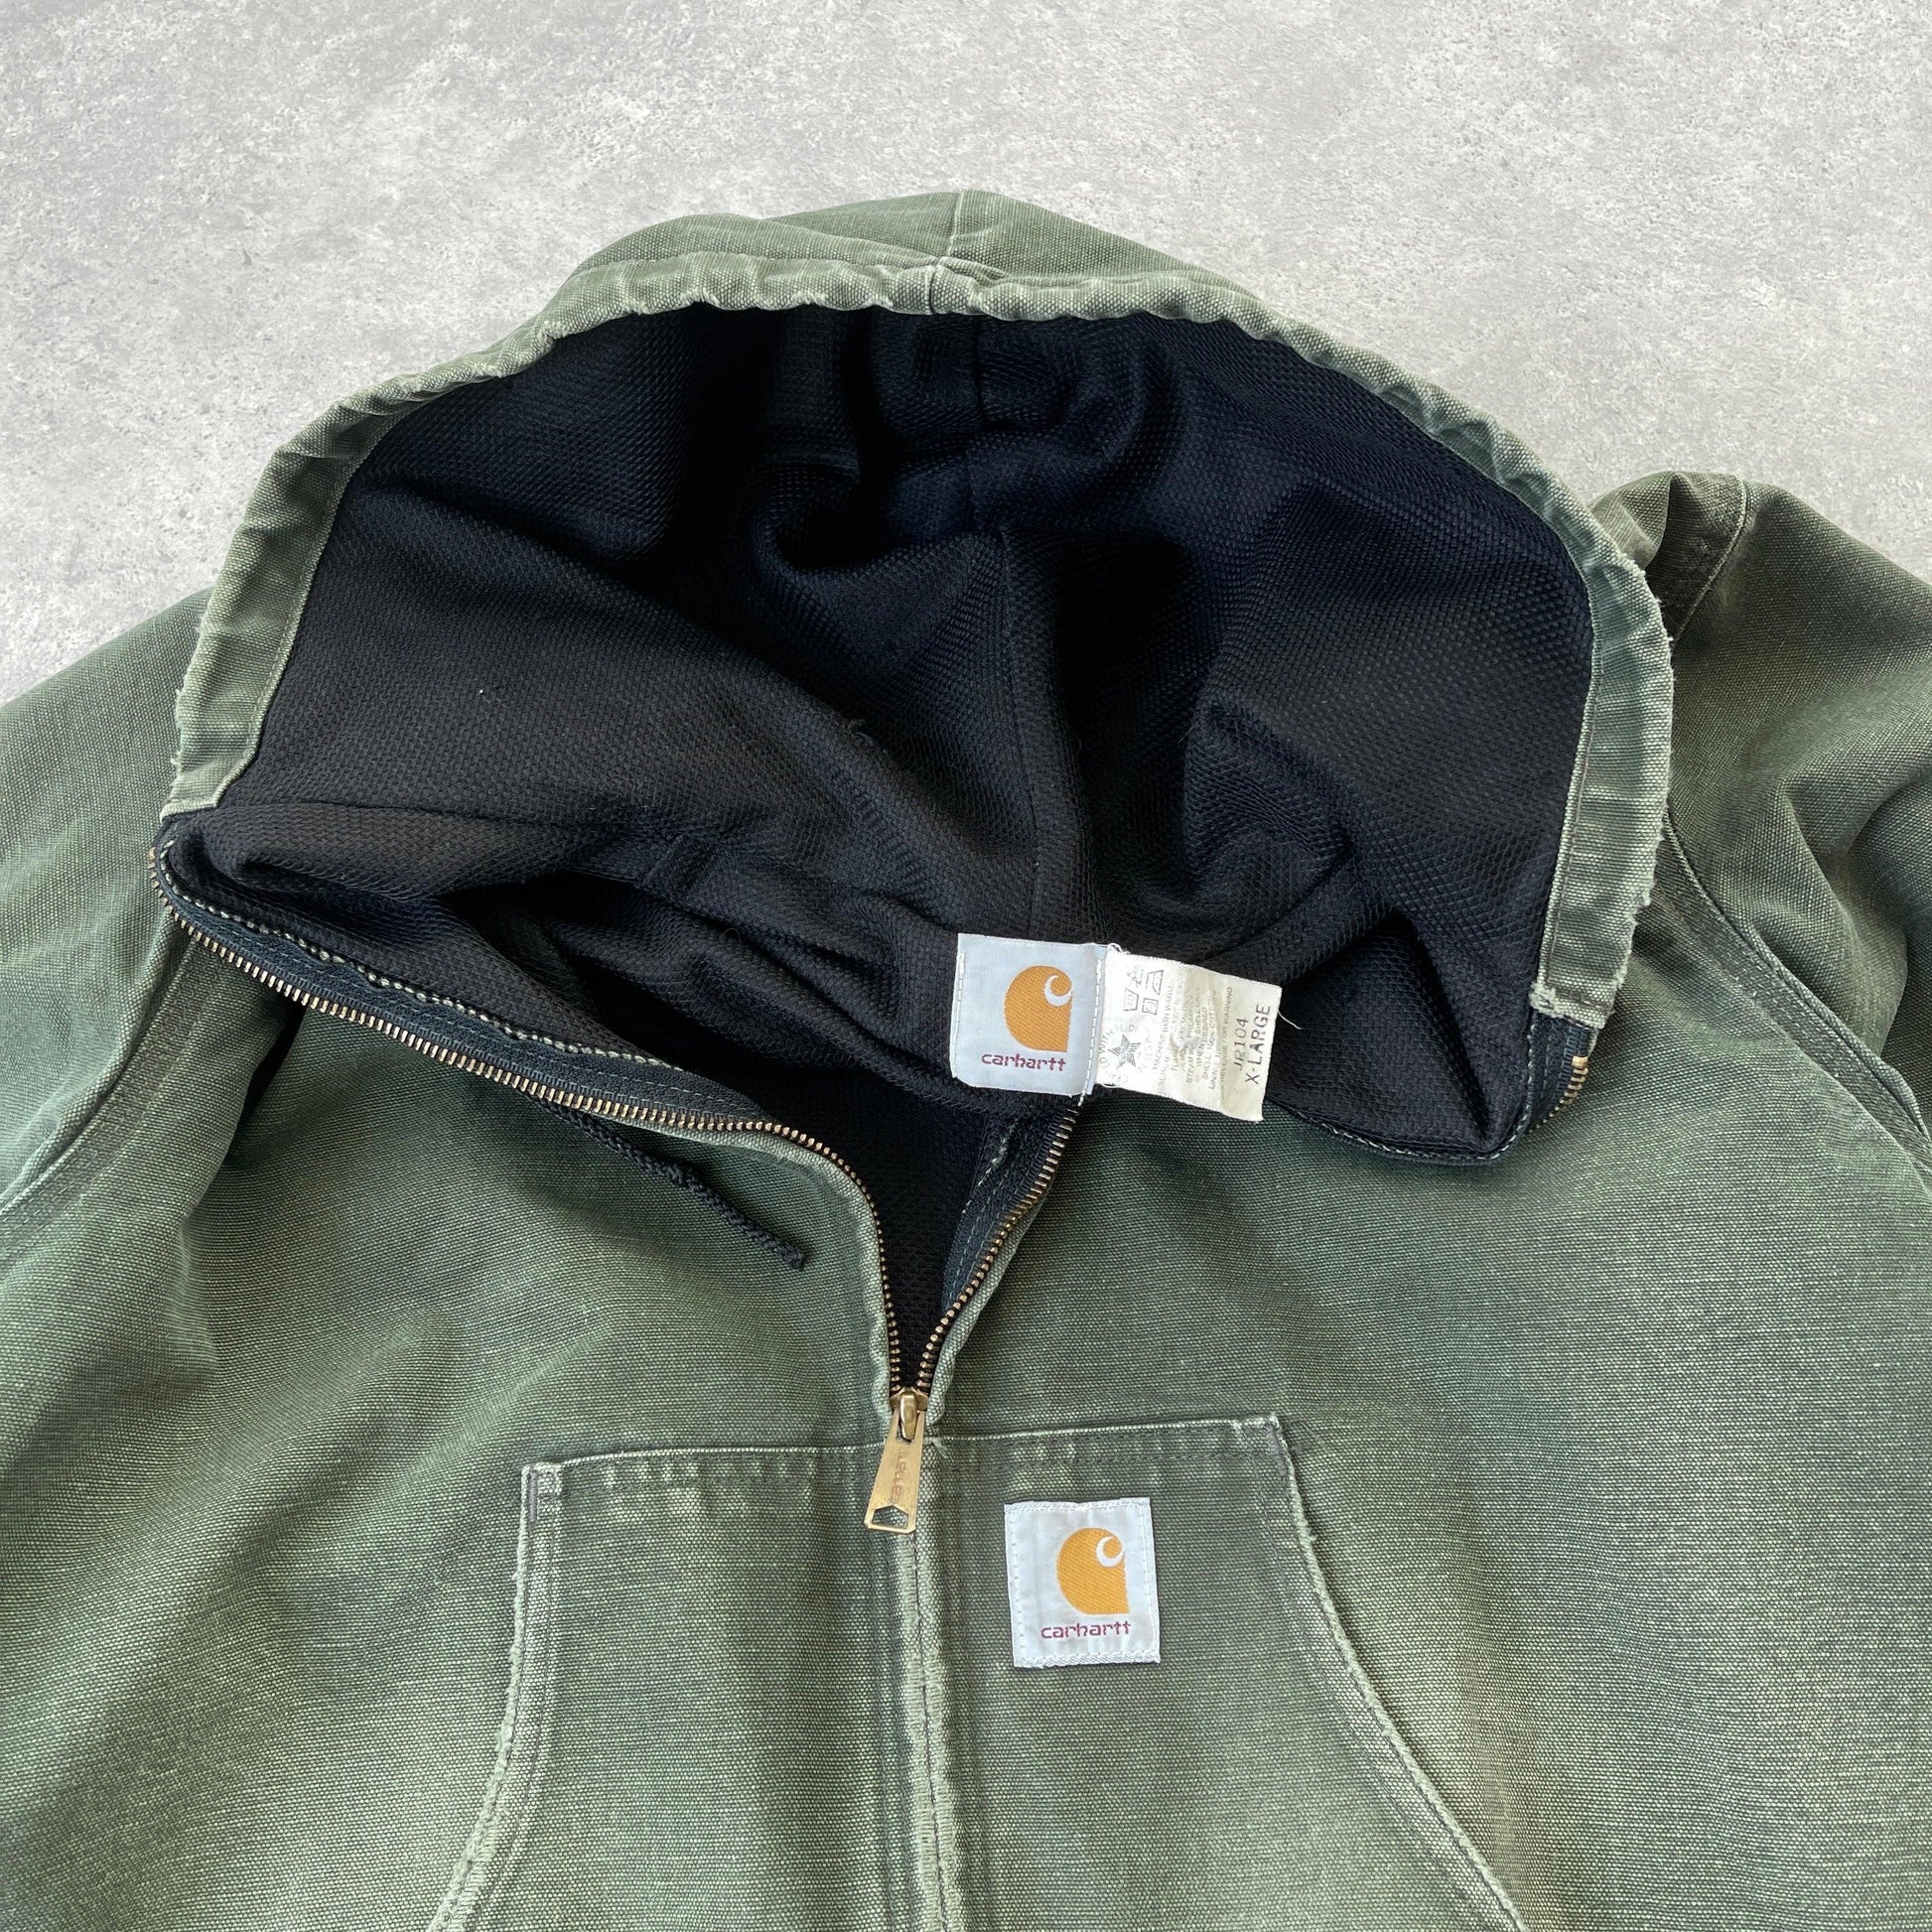 Carhartt 1994 heavyweight active hooded jacket (XL) - Known Source